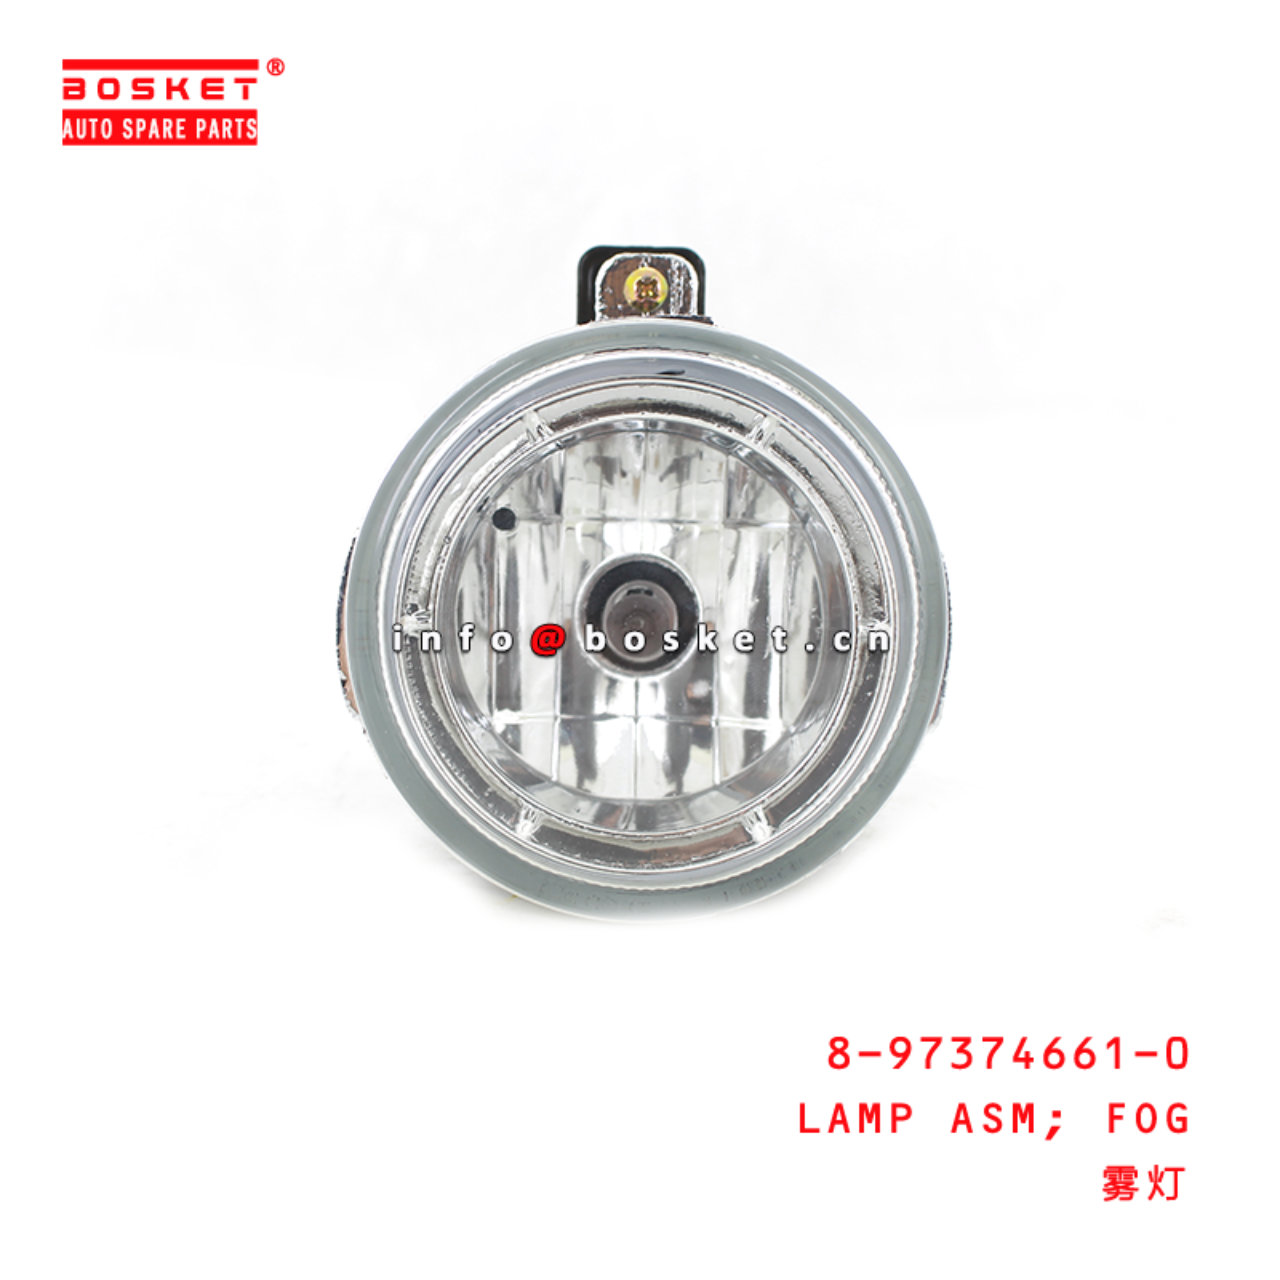 8-97374661-0 Fog Lamp Assembly Suitable for ISUZU DMAX 06  8973746610